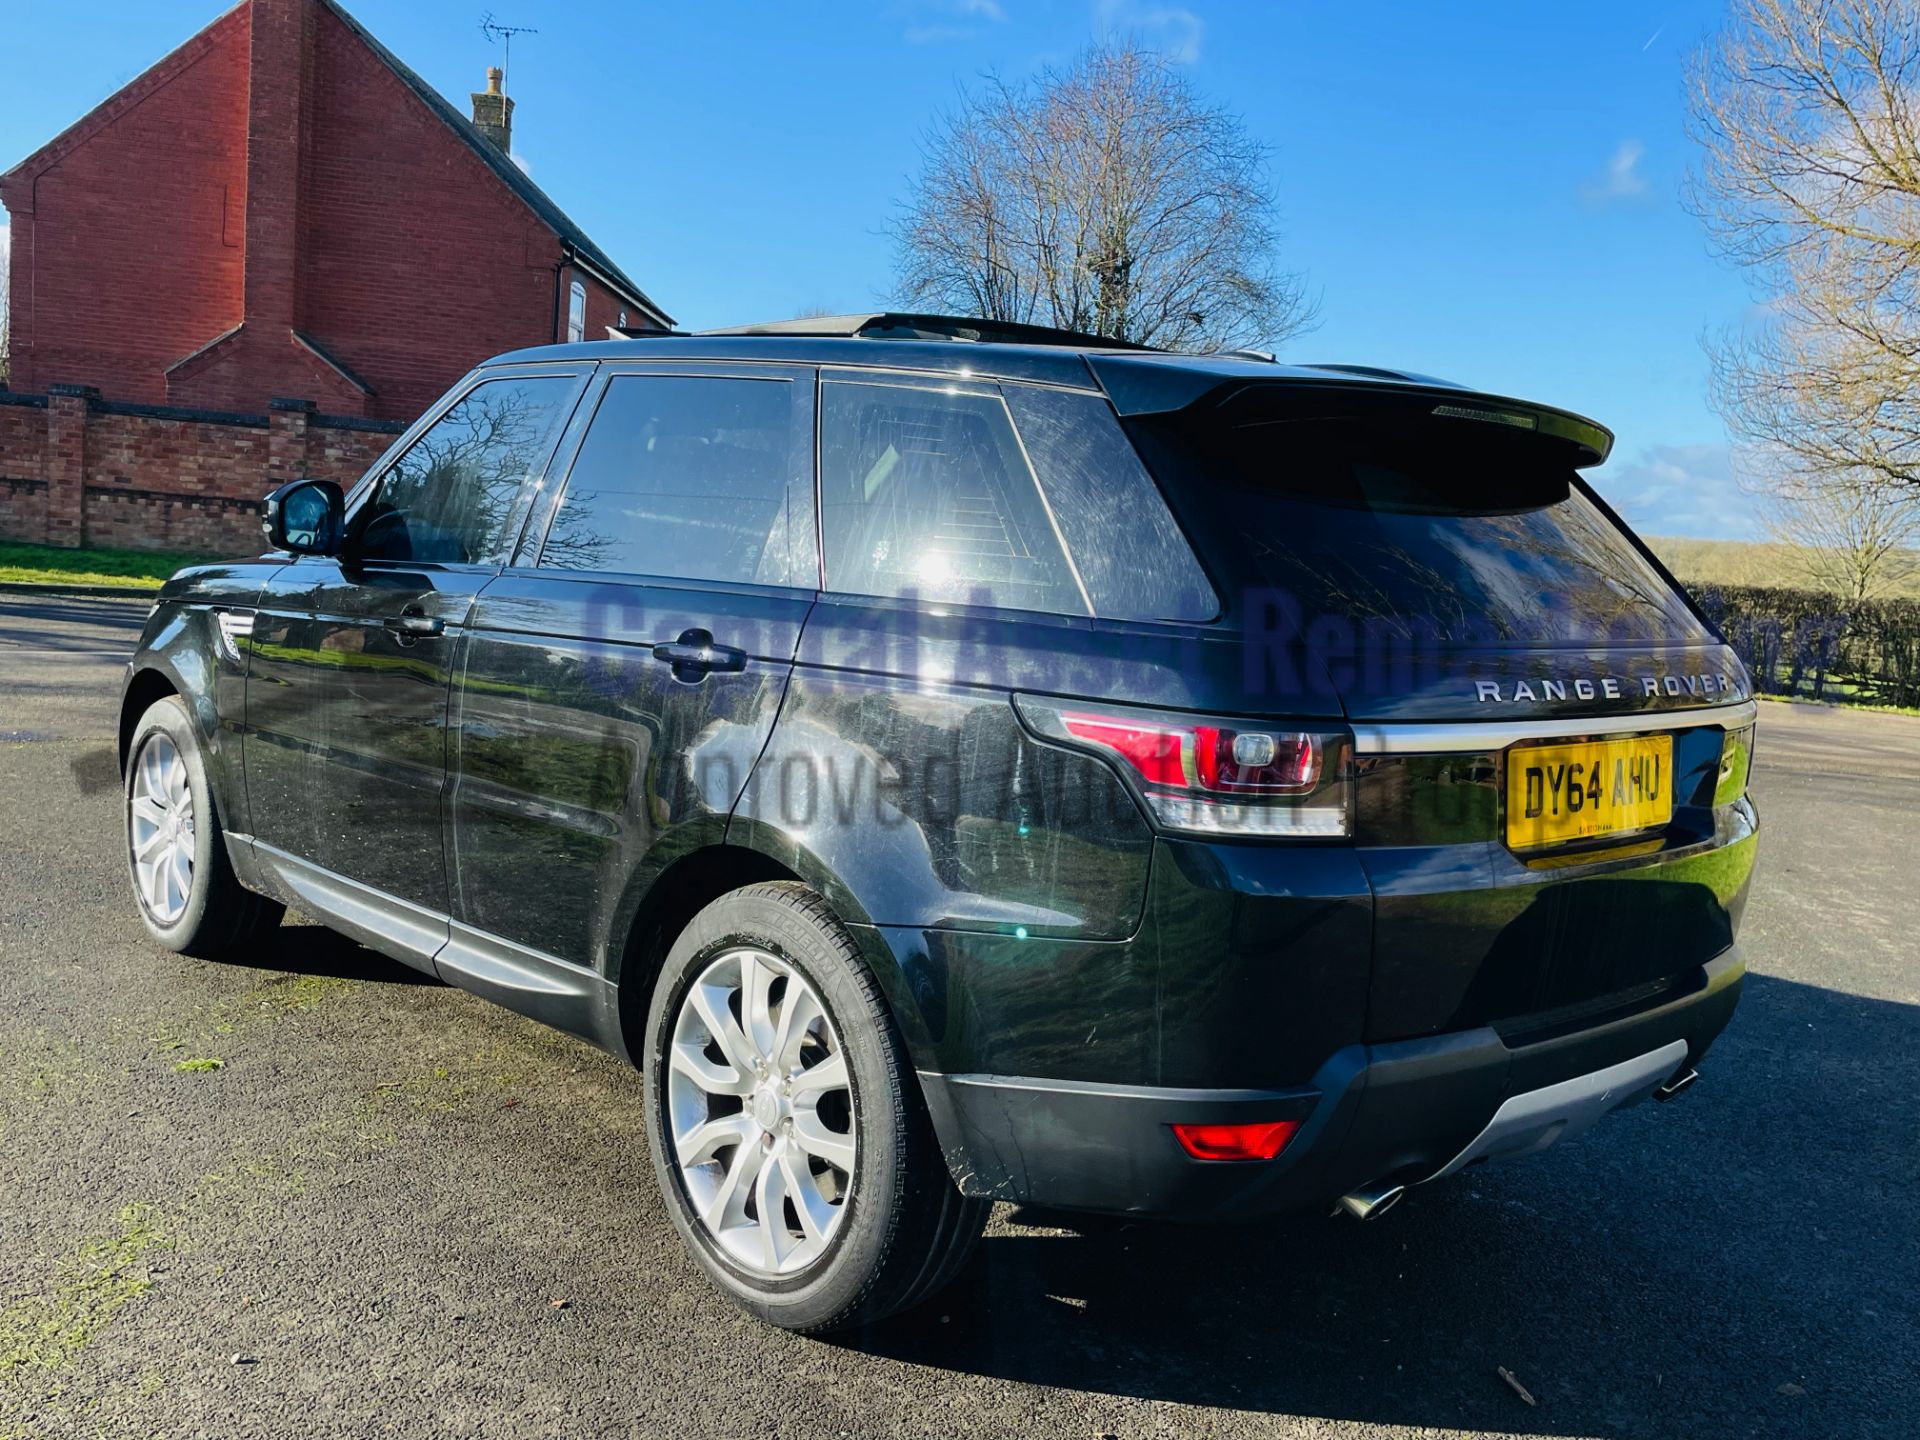 (ON SALE) RANGE ROVER SPORT *HSE EDITION* SUV (2015-NEW MODEL) '3.0 SDV6-8 SPEED AUTO'*FULLY LOADED* - Image 10 of 61